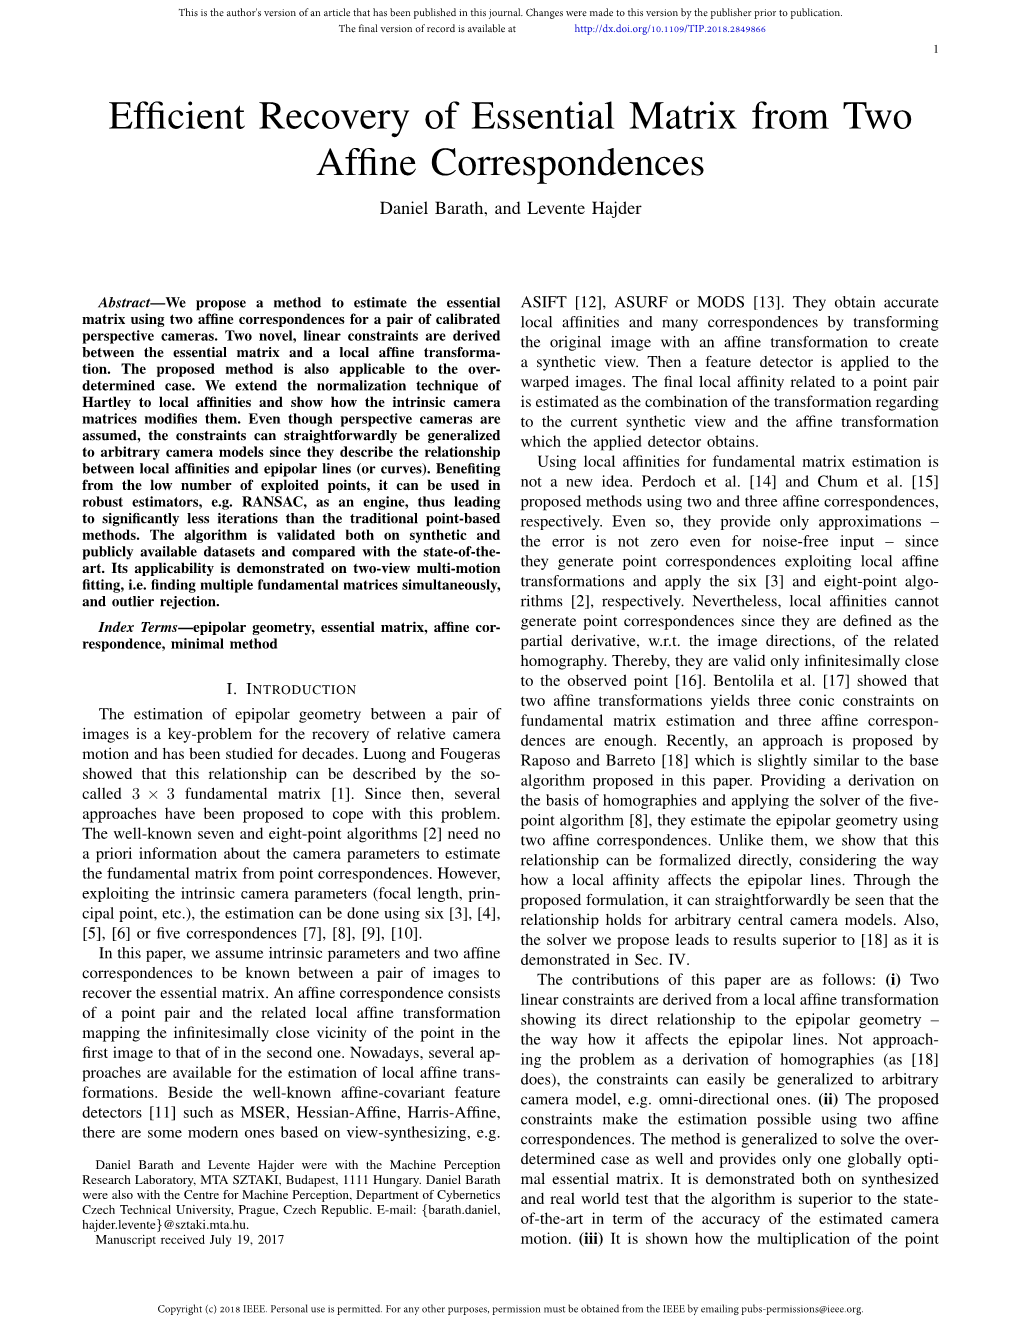 Efficient Recovery of Essential Matrix from Two Affine Correspondences